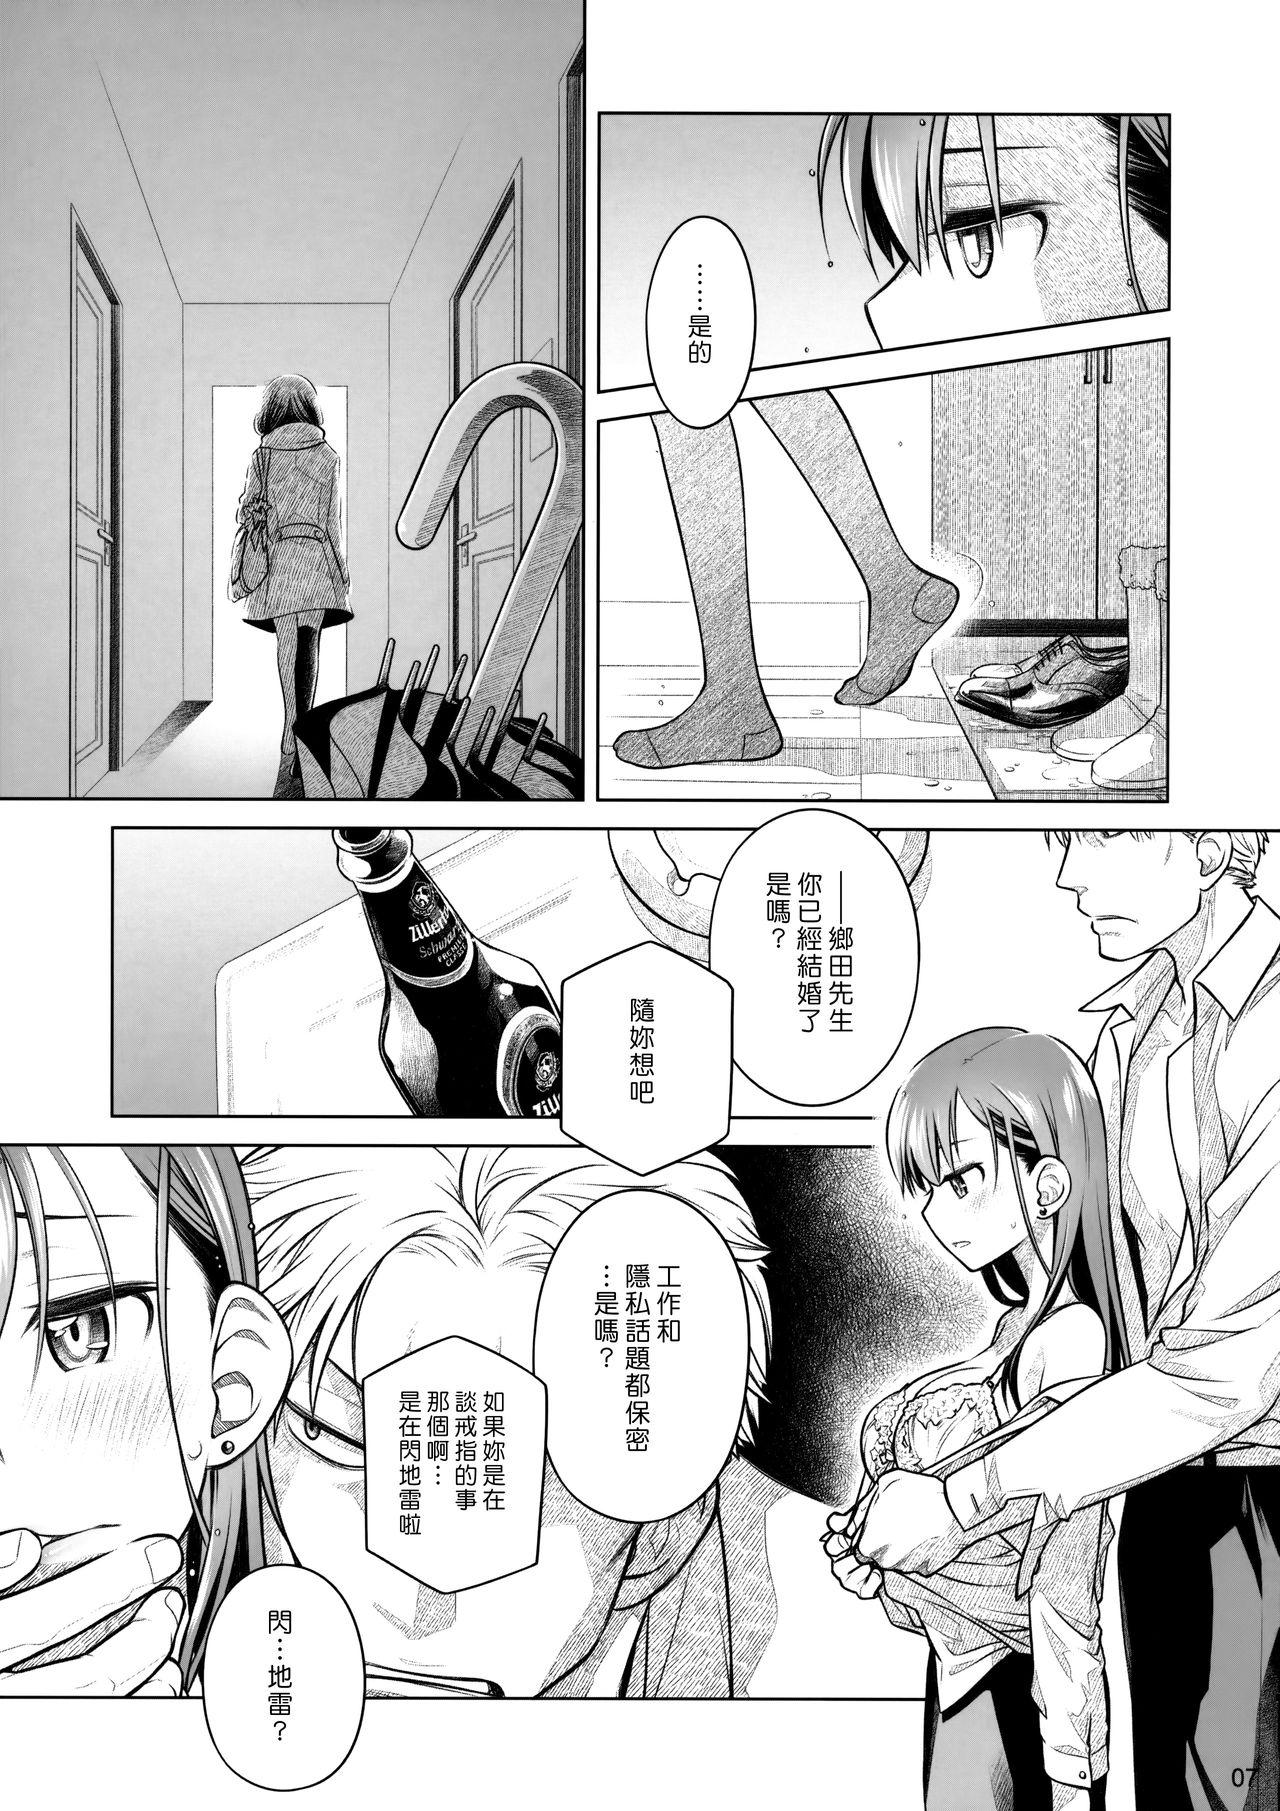 Romance Stay by Me Zenjitsutan Fragile S - Stay by me "Prequel" Girls Getting Fucked - Page 6